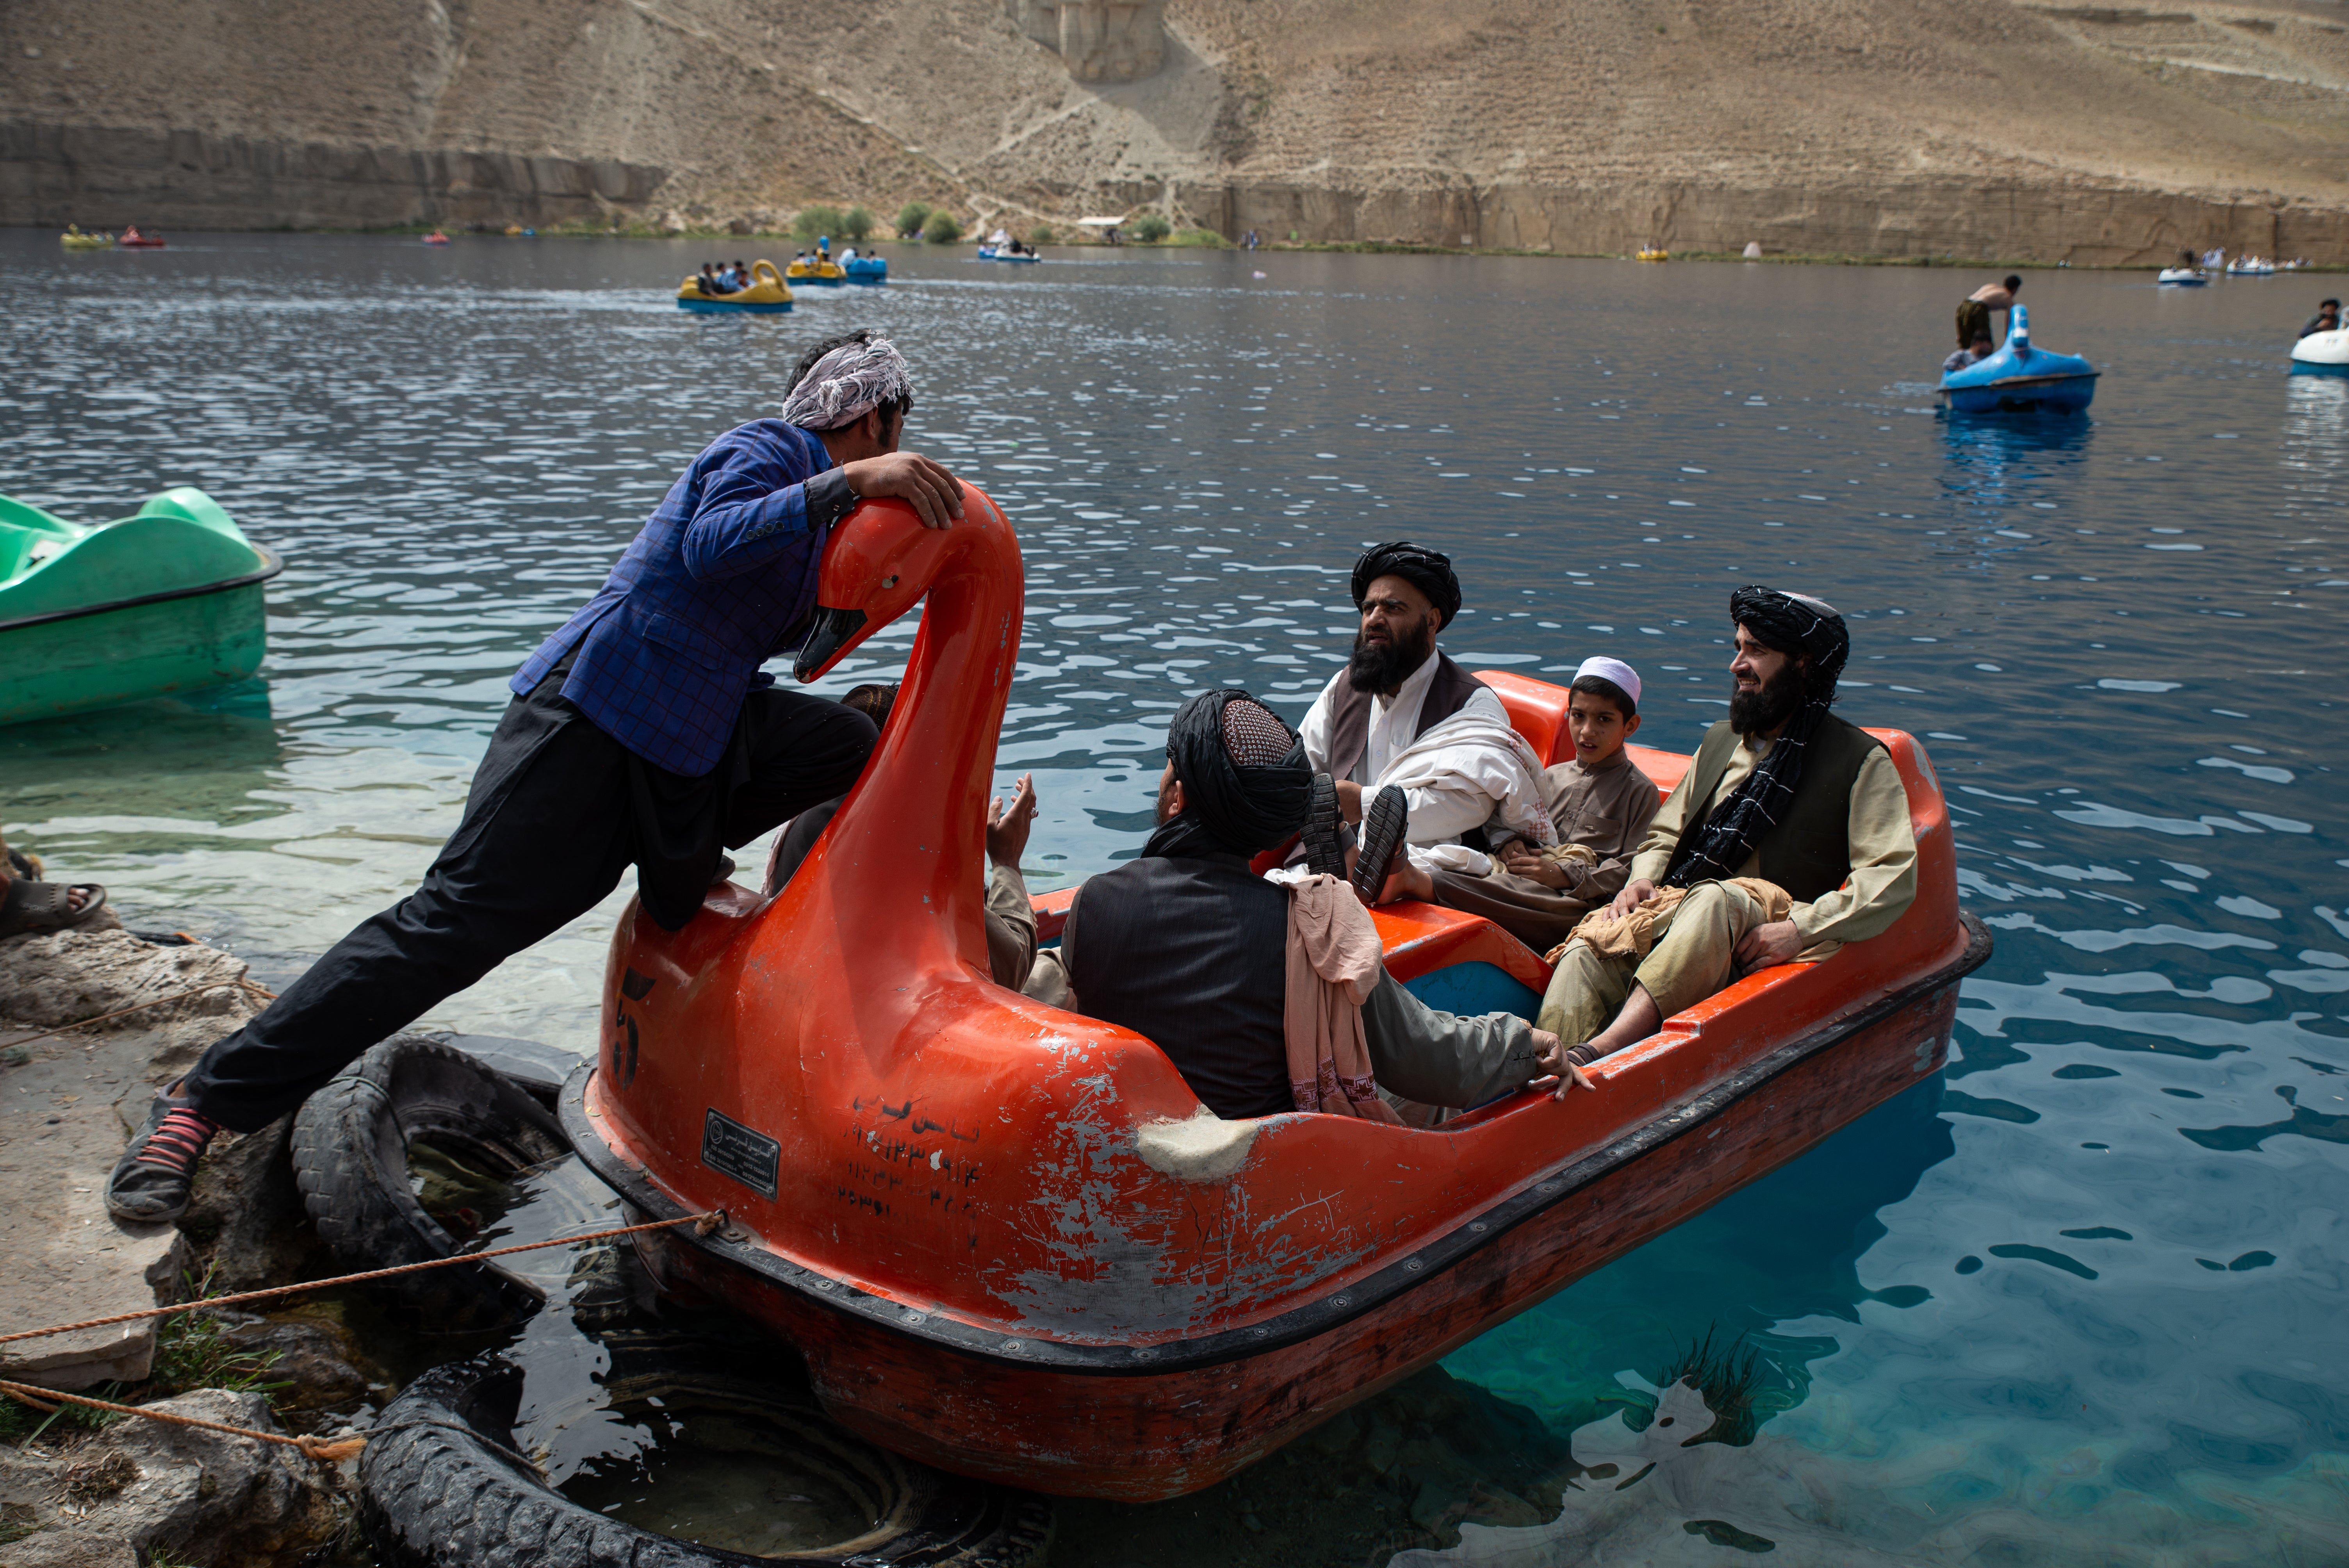 Afghan families and Taliban members visit one of the lakes in Band-e Amir national park, a popular week-end destination, on August 12, 2022